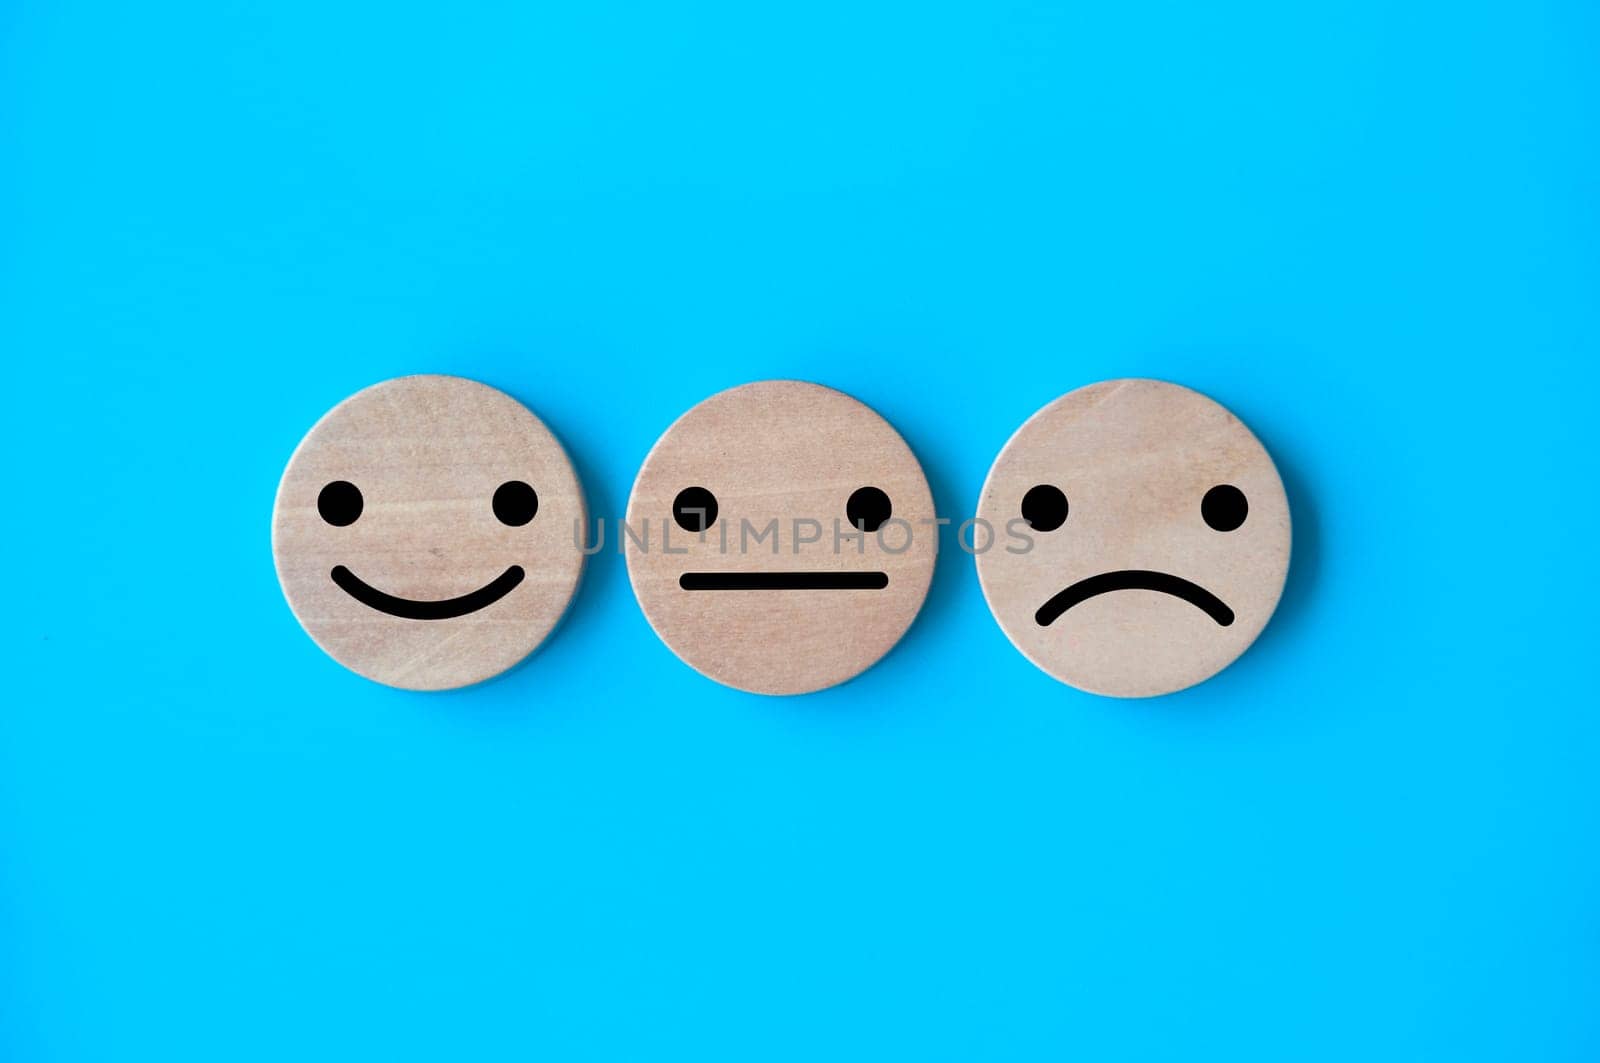 Happy, neutral, and sad emotion faces on wooden circle. Customer satisfaction and evaluation concept.